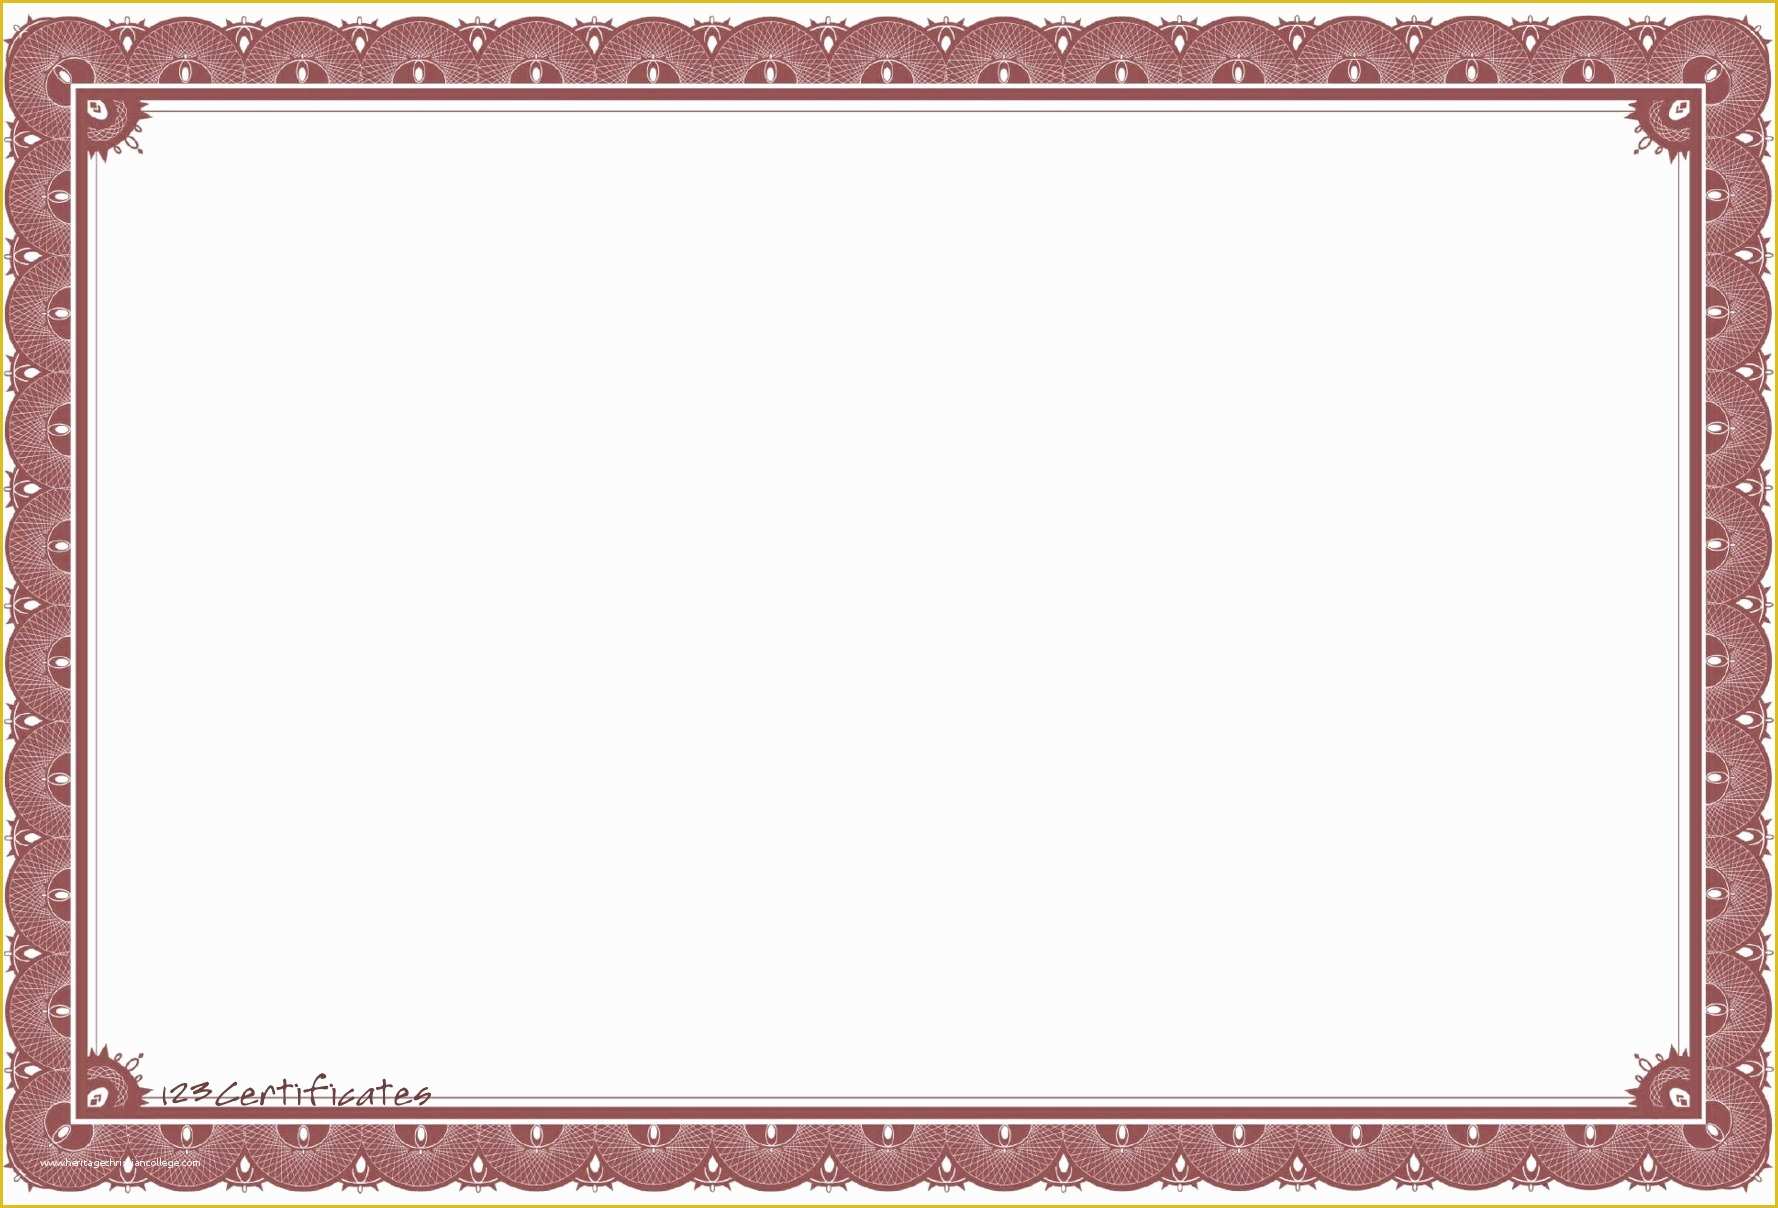 Certificate Templates Free Download Of Free Certificate Borders to